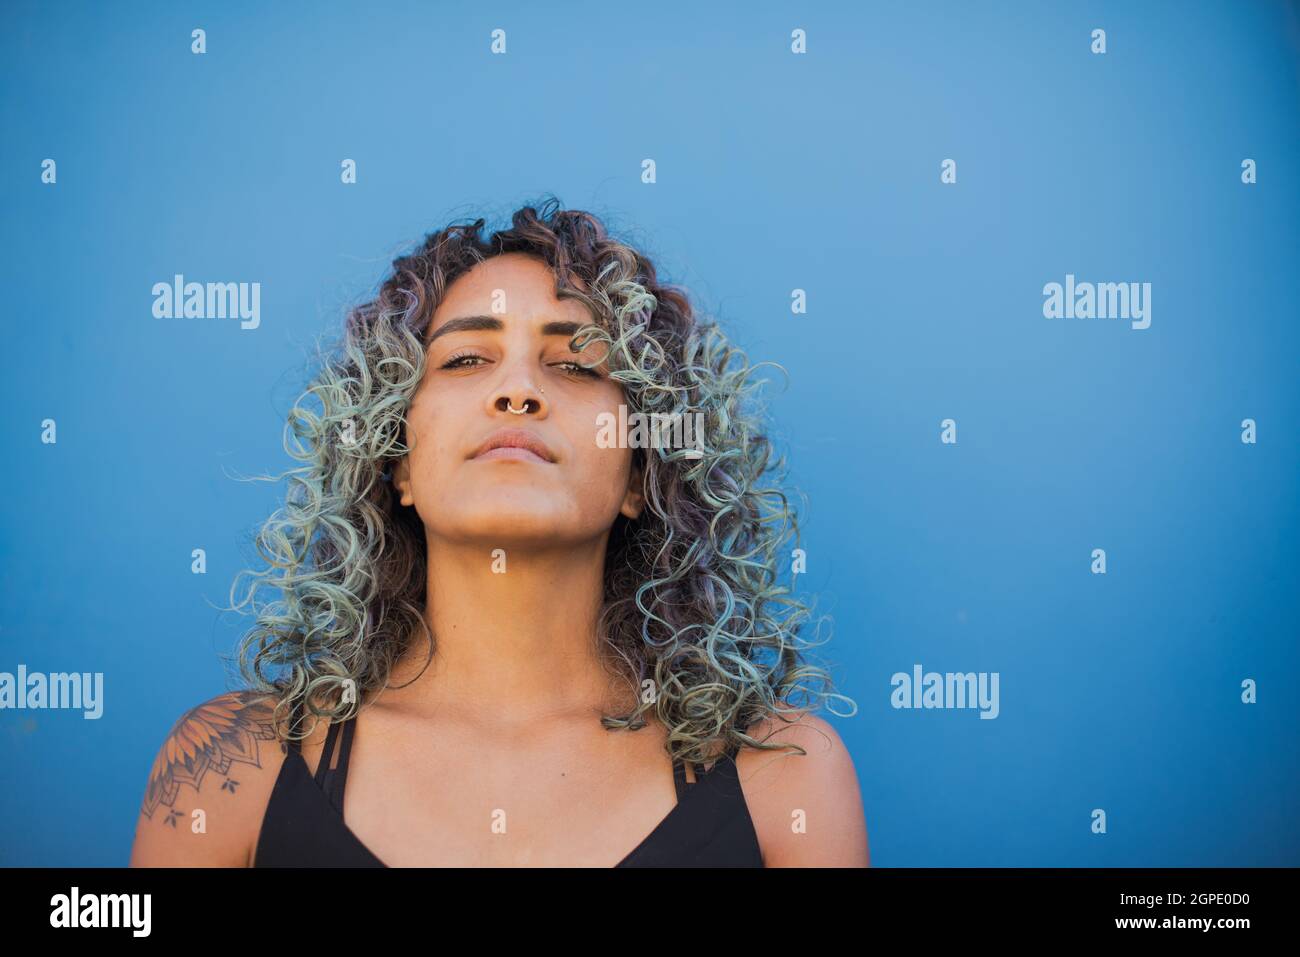 woman with curly hair shot against blue background 2GPE0D0